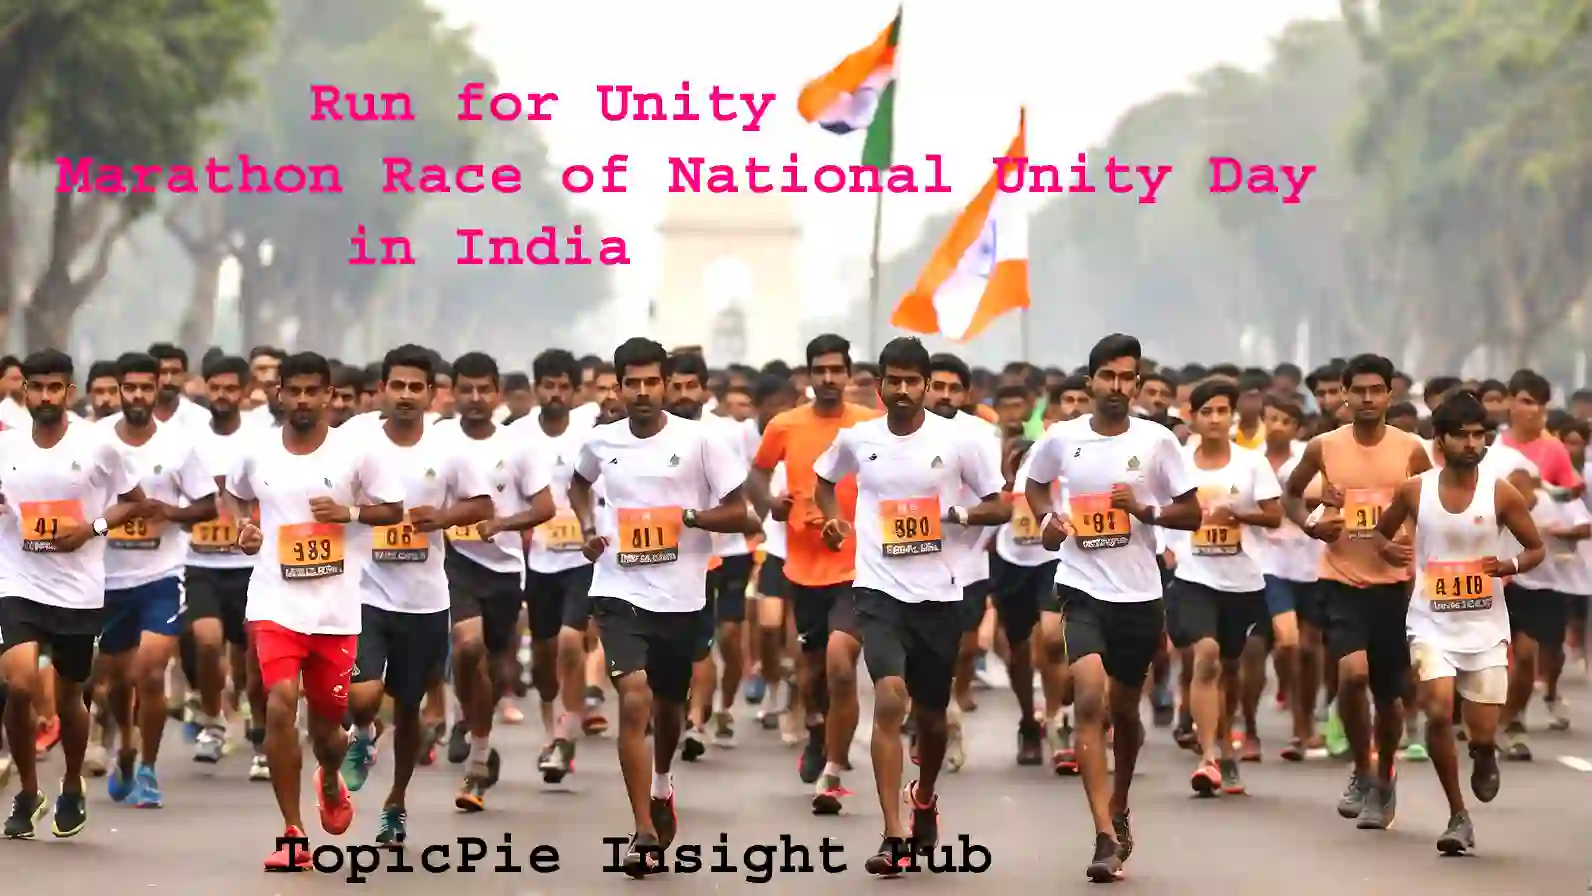 Run for Unity (Marathon Race of National Unity Day in India)